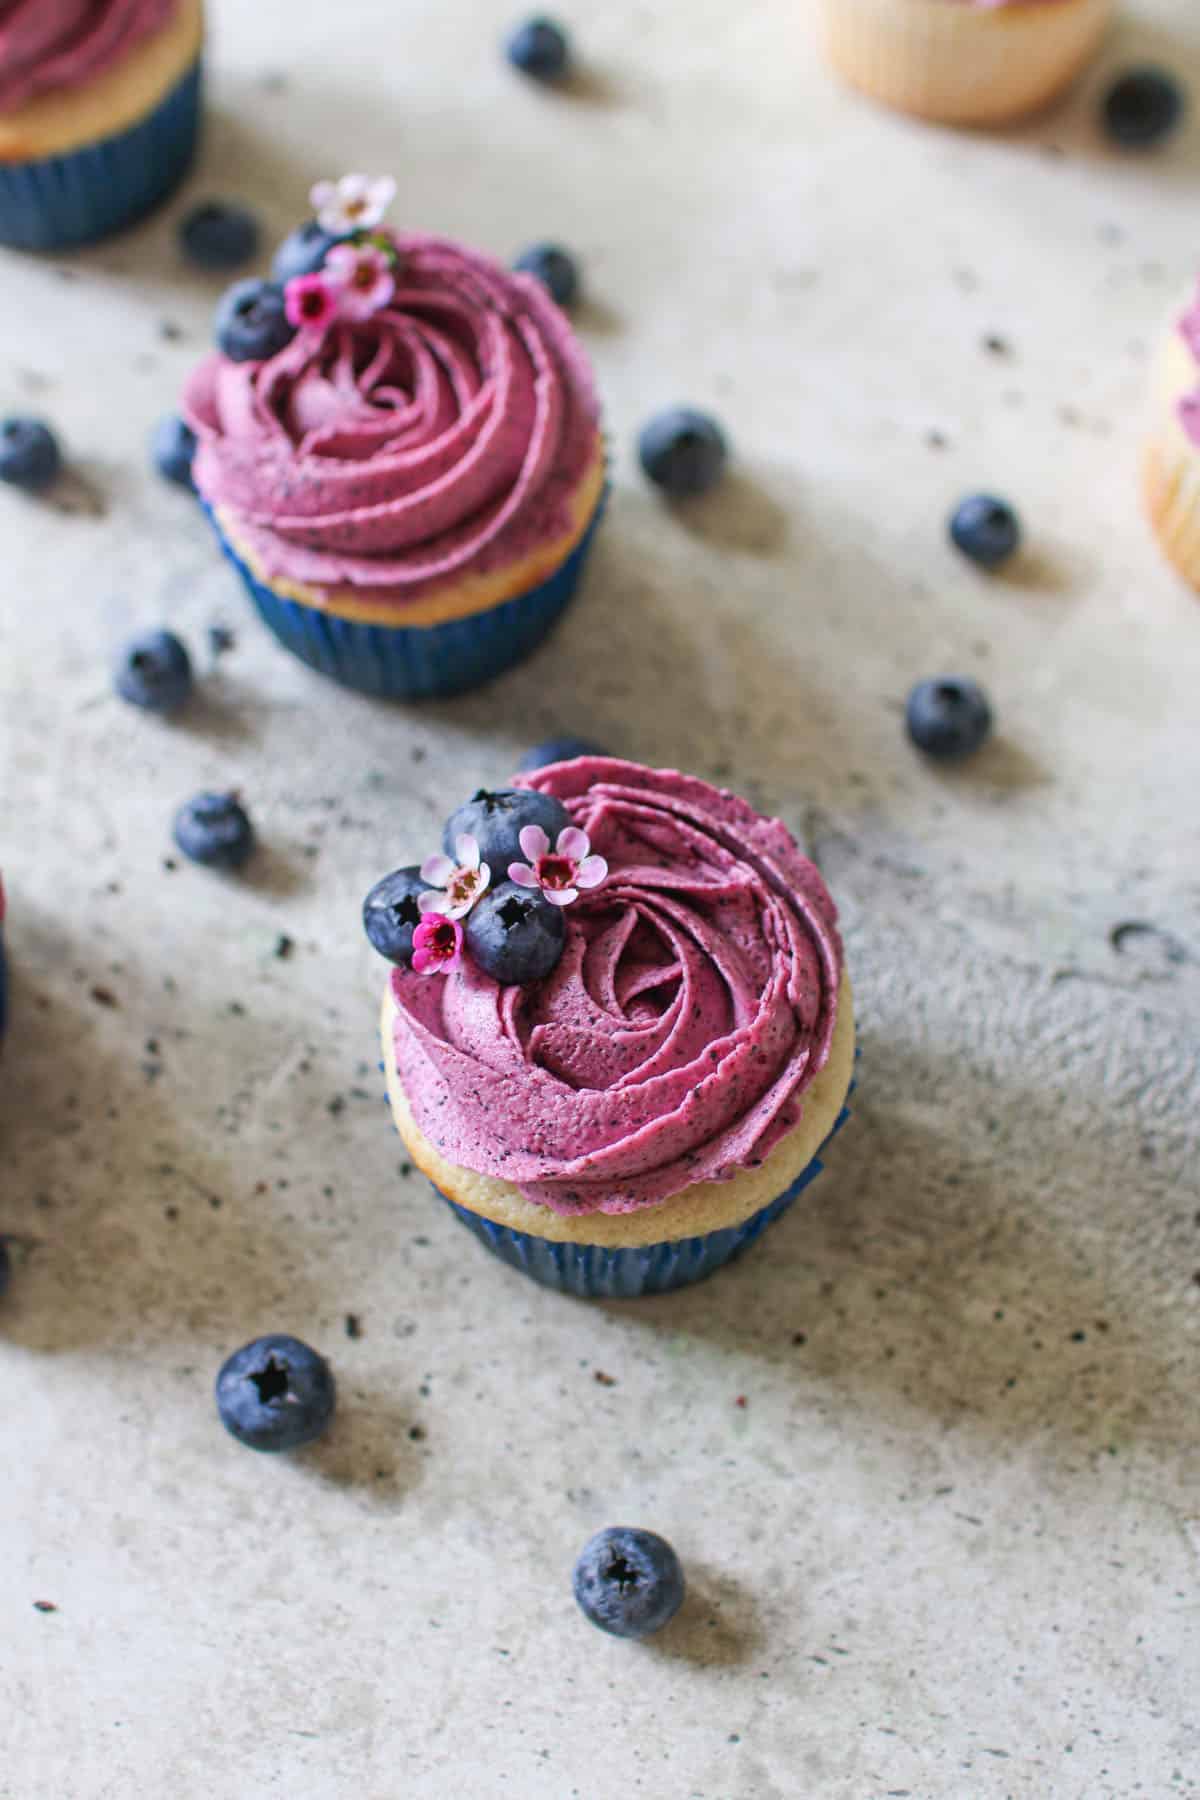 Blueberry buttercream on vanilla cakes lined with a blue cupcake liner. The blueberry buttercream is swirled on top of the cupcake and has fresh blueberries and small pink flowers. The cupcakes sit on a cement background and surrounded by other cupcakes and more fresh blueberries.